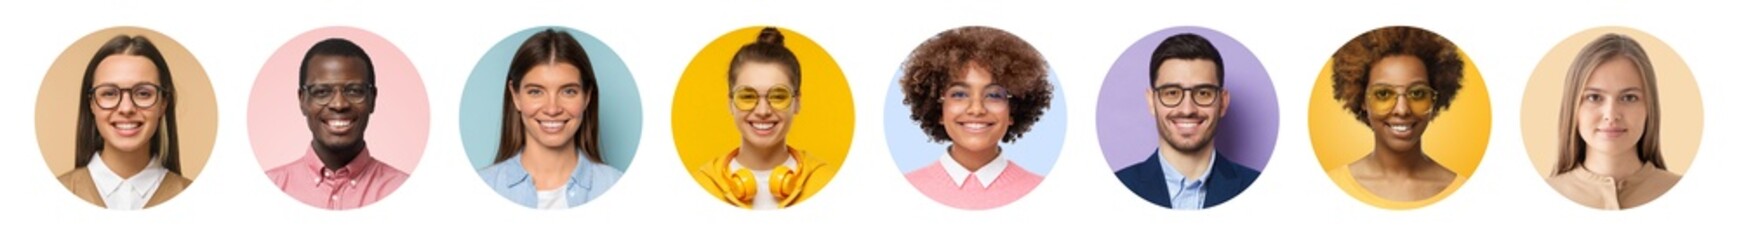 Collage of portrait and face of group of young diverse people for profile picture